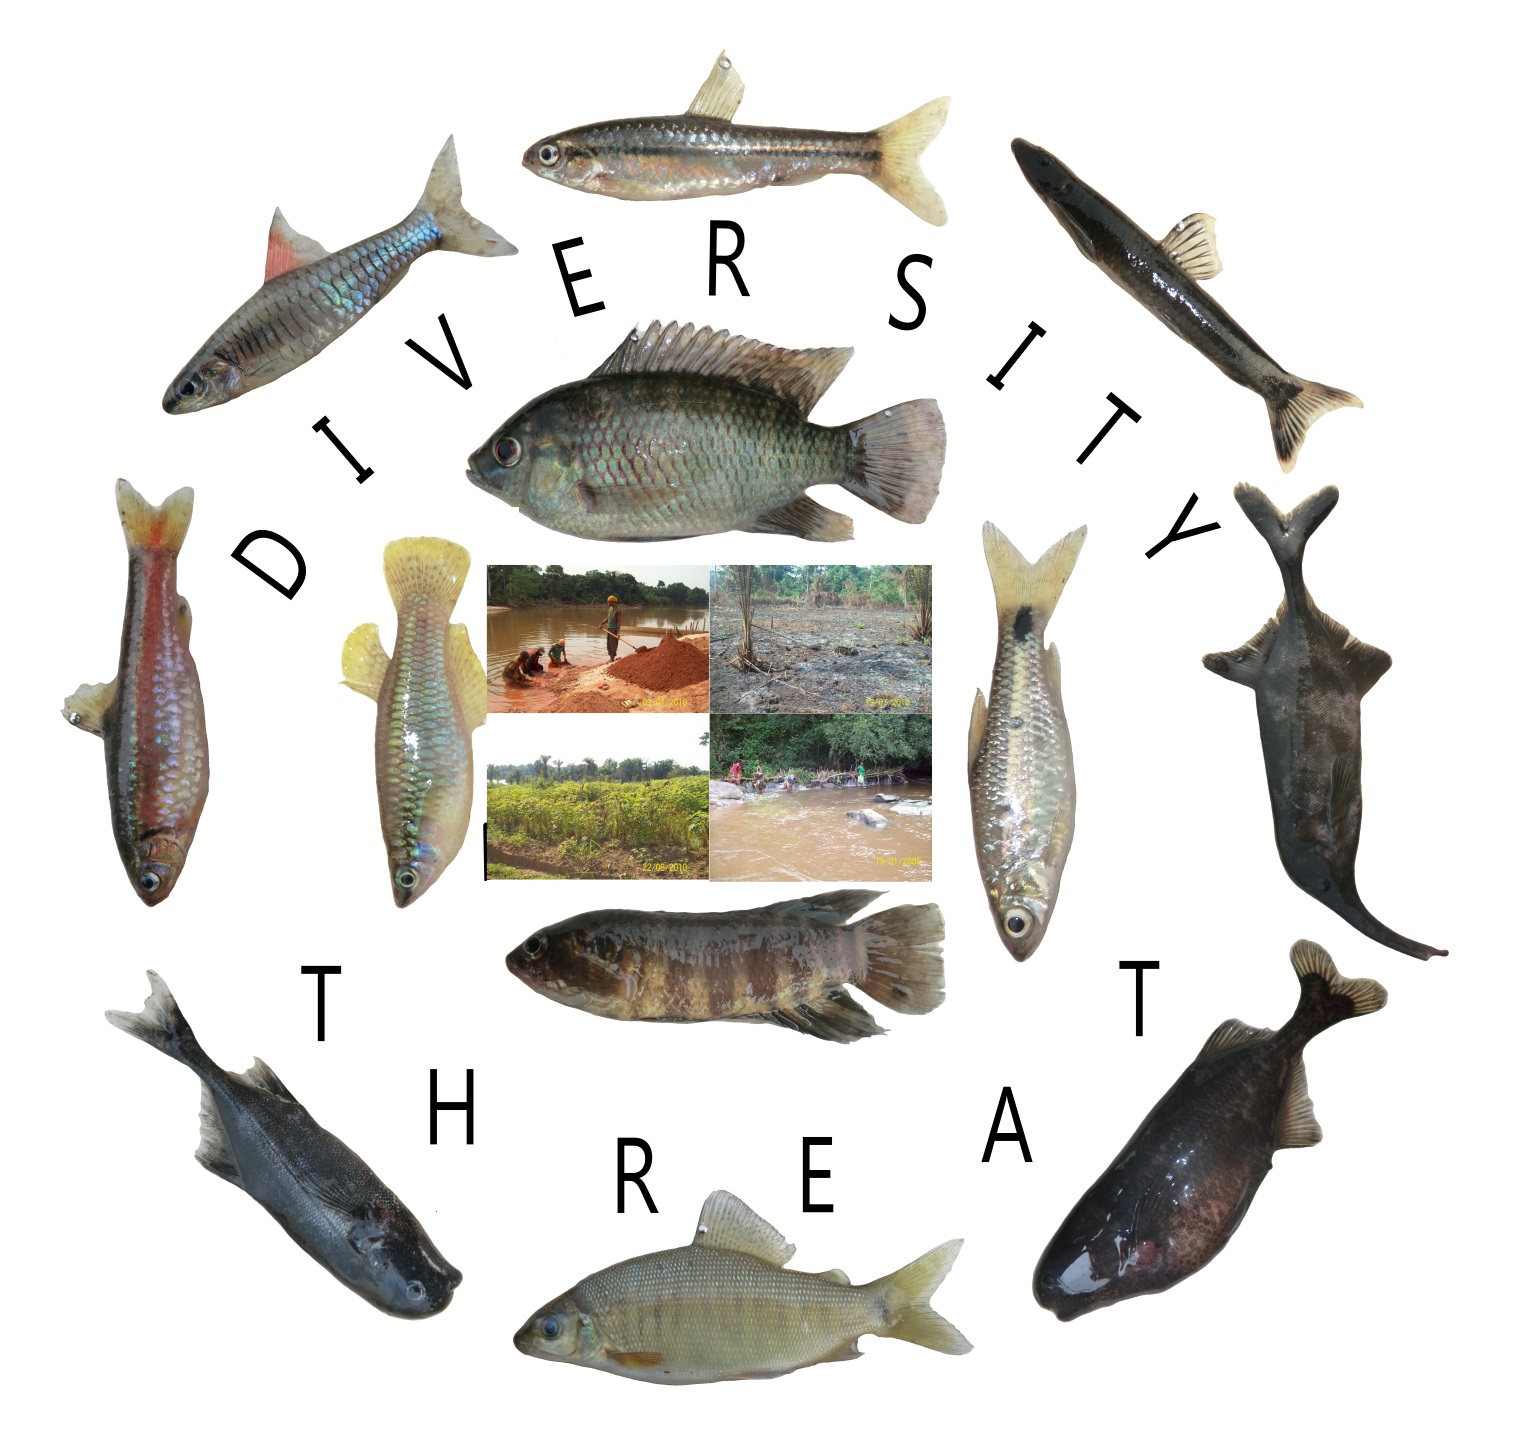 Diversity | Free Full-Text | Fishes of the Lower Lulua River (Kasai Basin,  Central Africa): A Continental Hotspot of Ichthyofaunal Diversity under  Threat | HTML